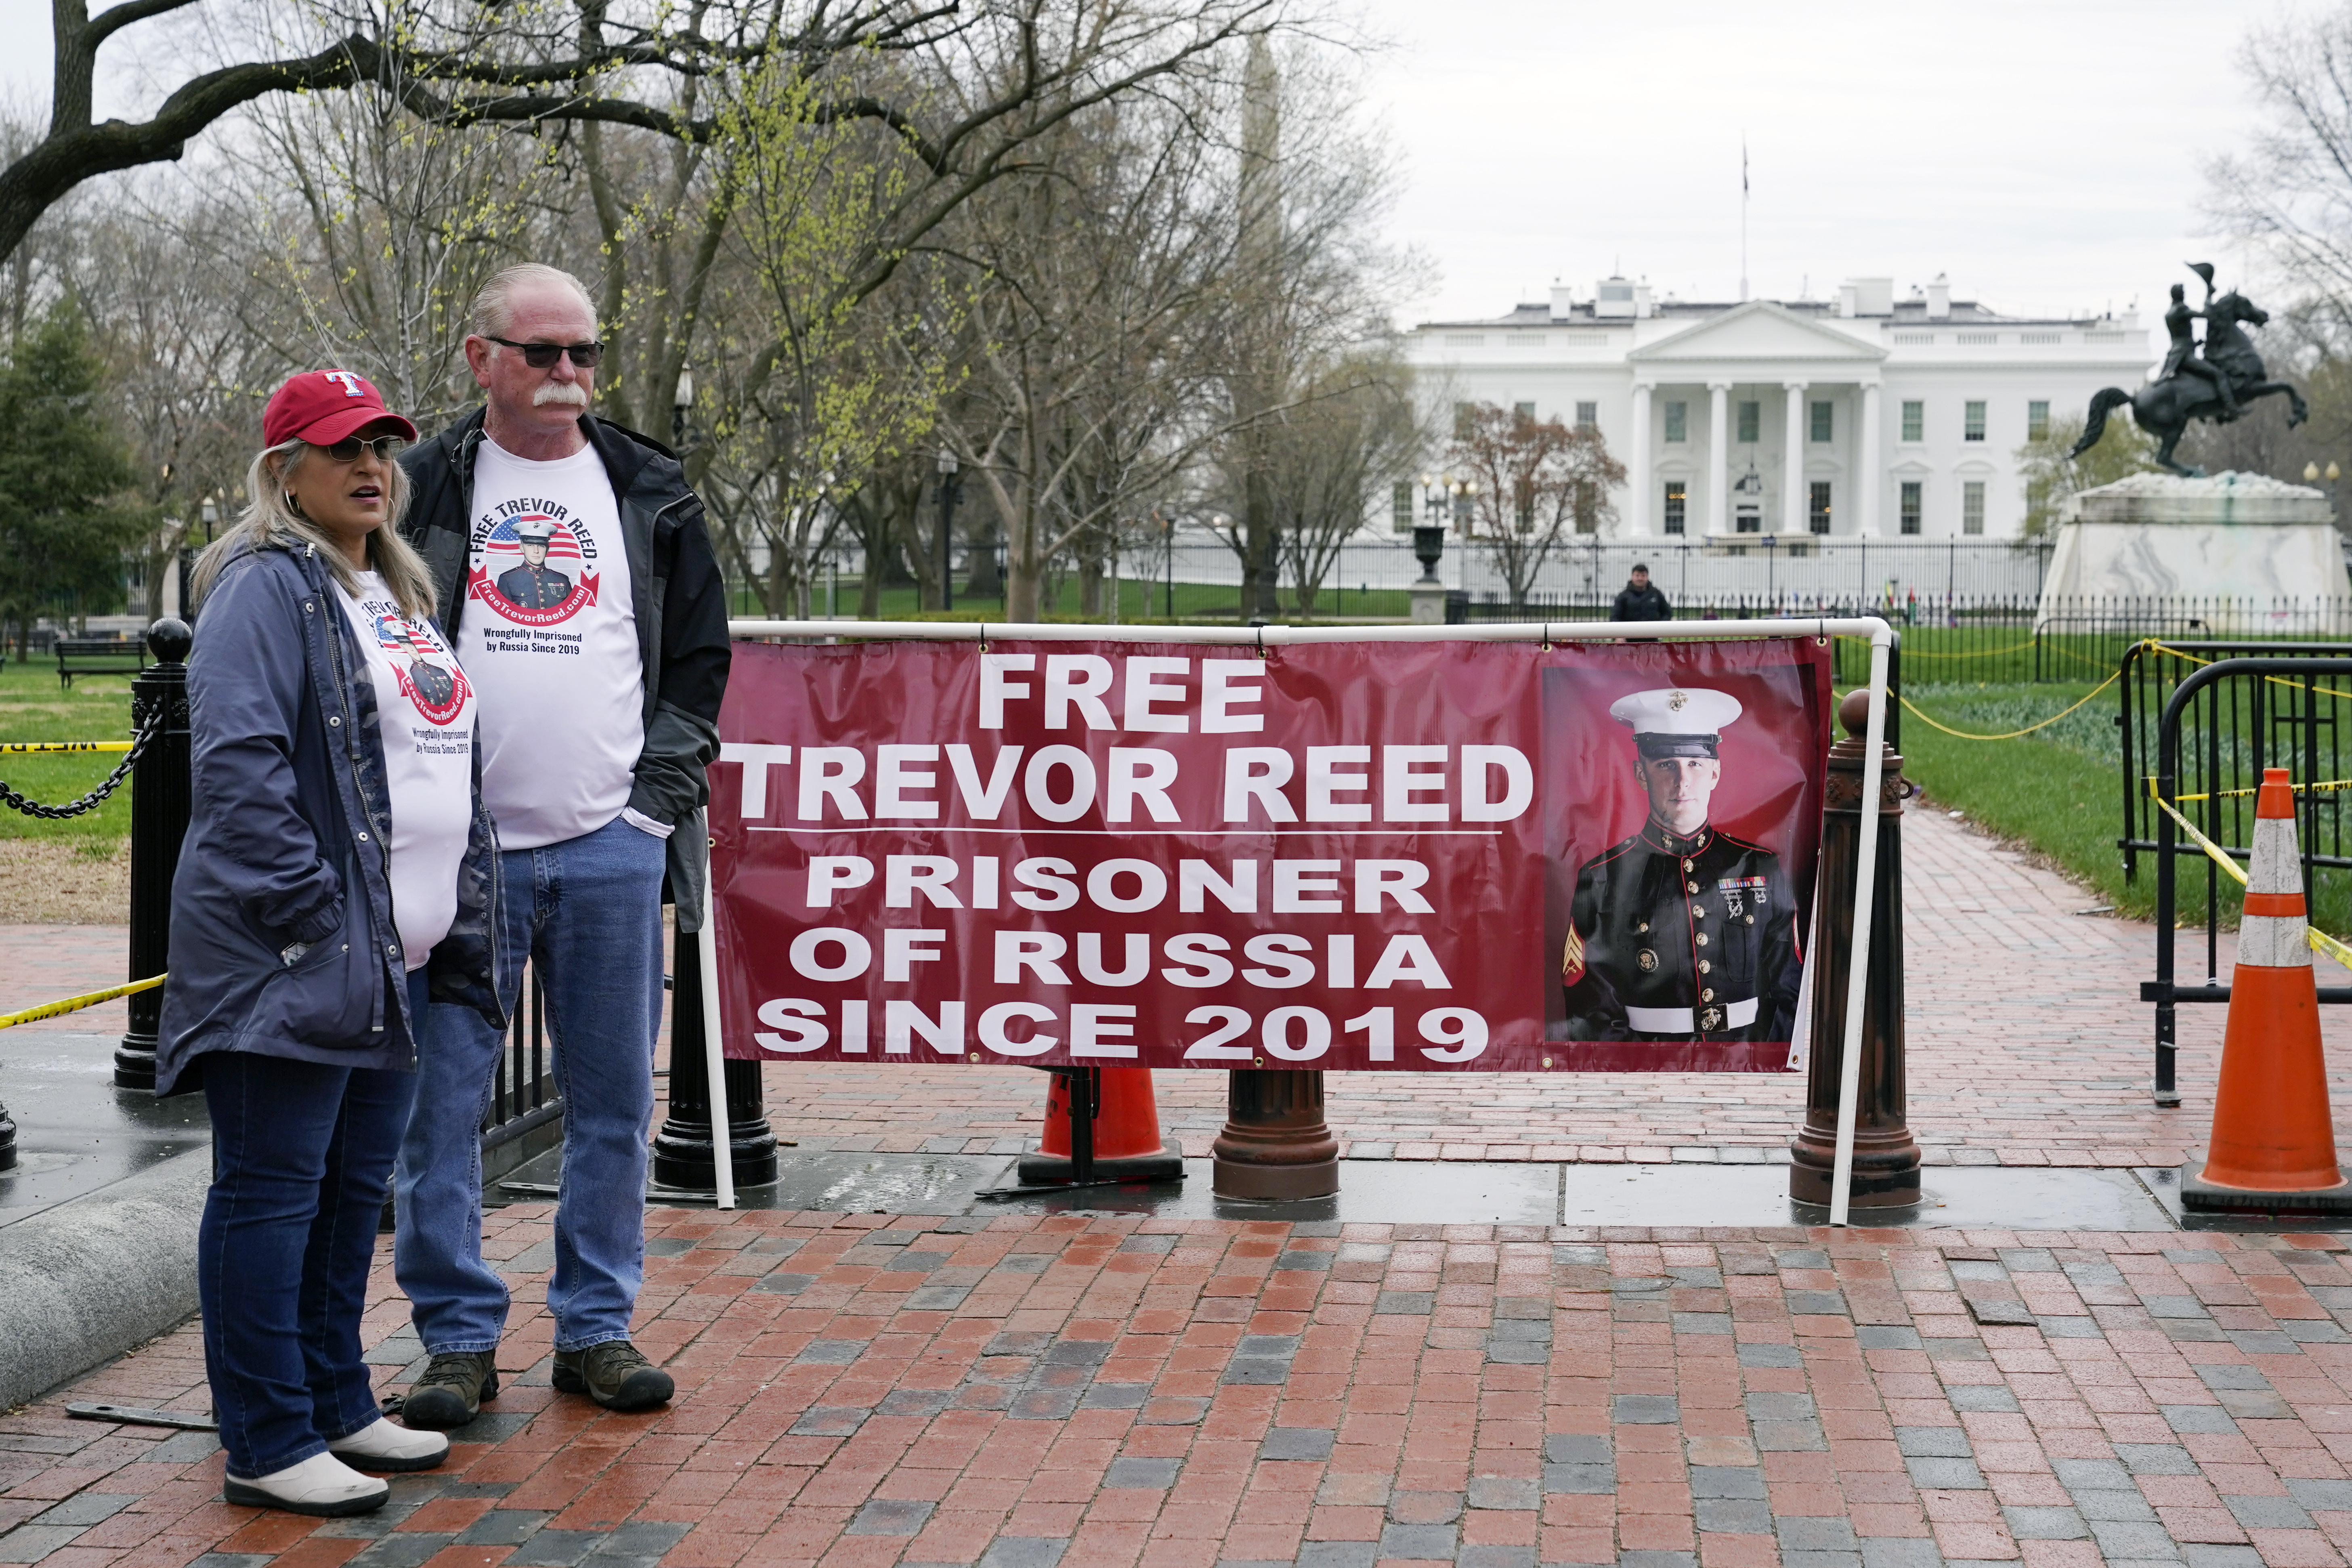 Joey and Paula Reed, parents of U.S. Marine Corps veteran and Russian prisoner Trevor Reed, stand in Lafayette Park near the White House on Wednesday, March 30.